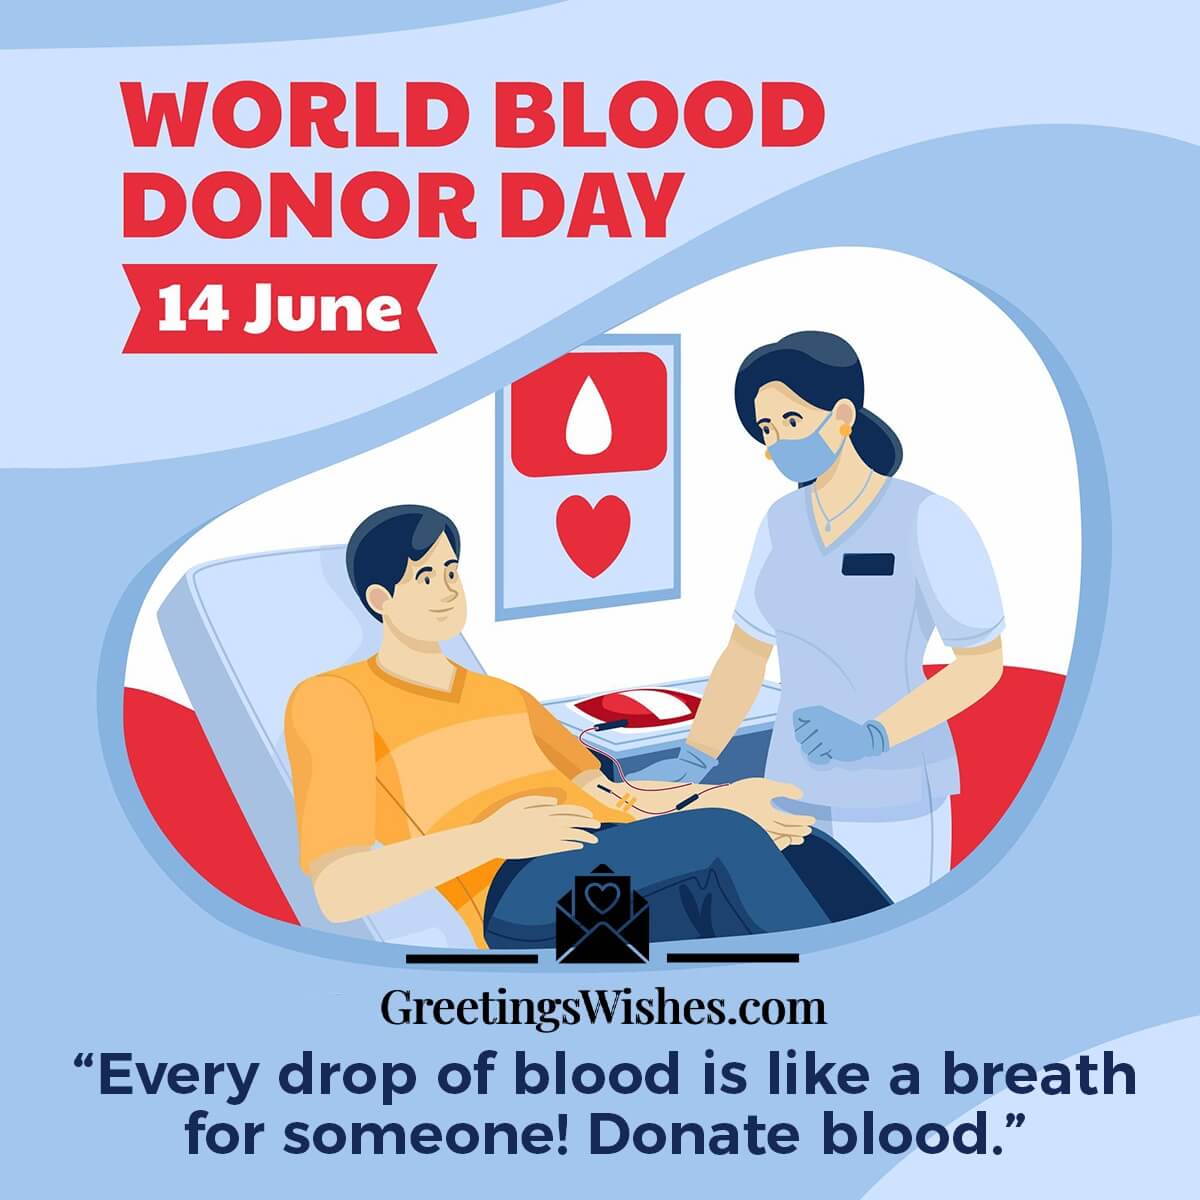 World Blood Donor Day Wishes (14 June)